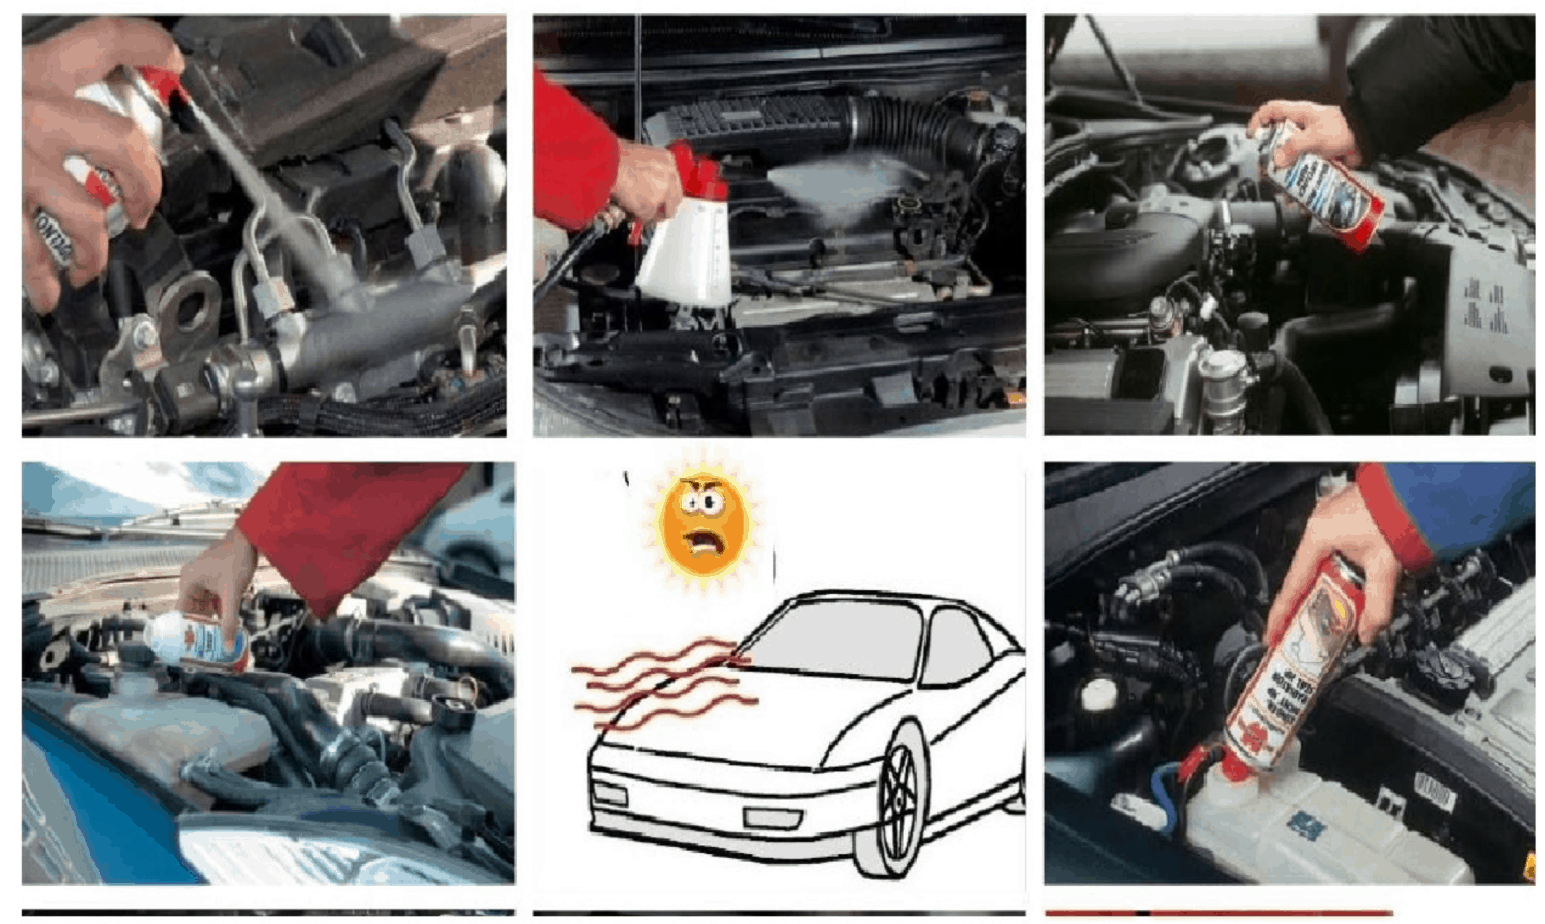 Steps to take care of the engine compartment properly